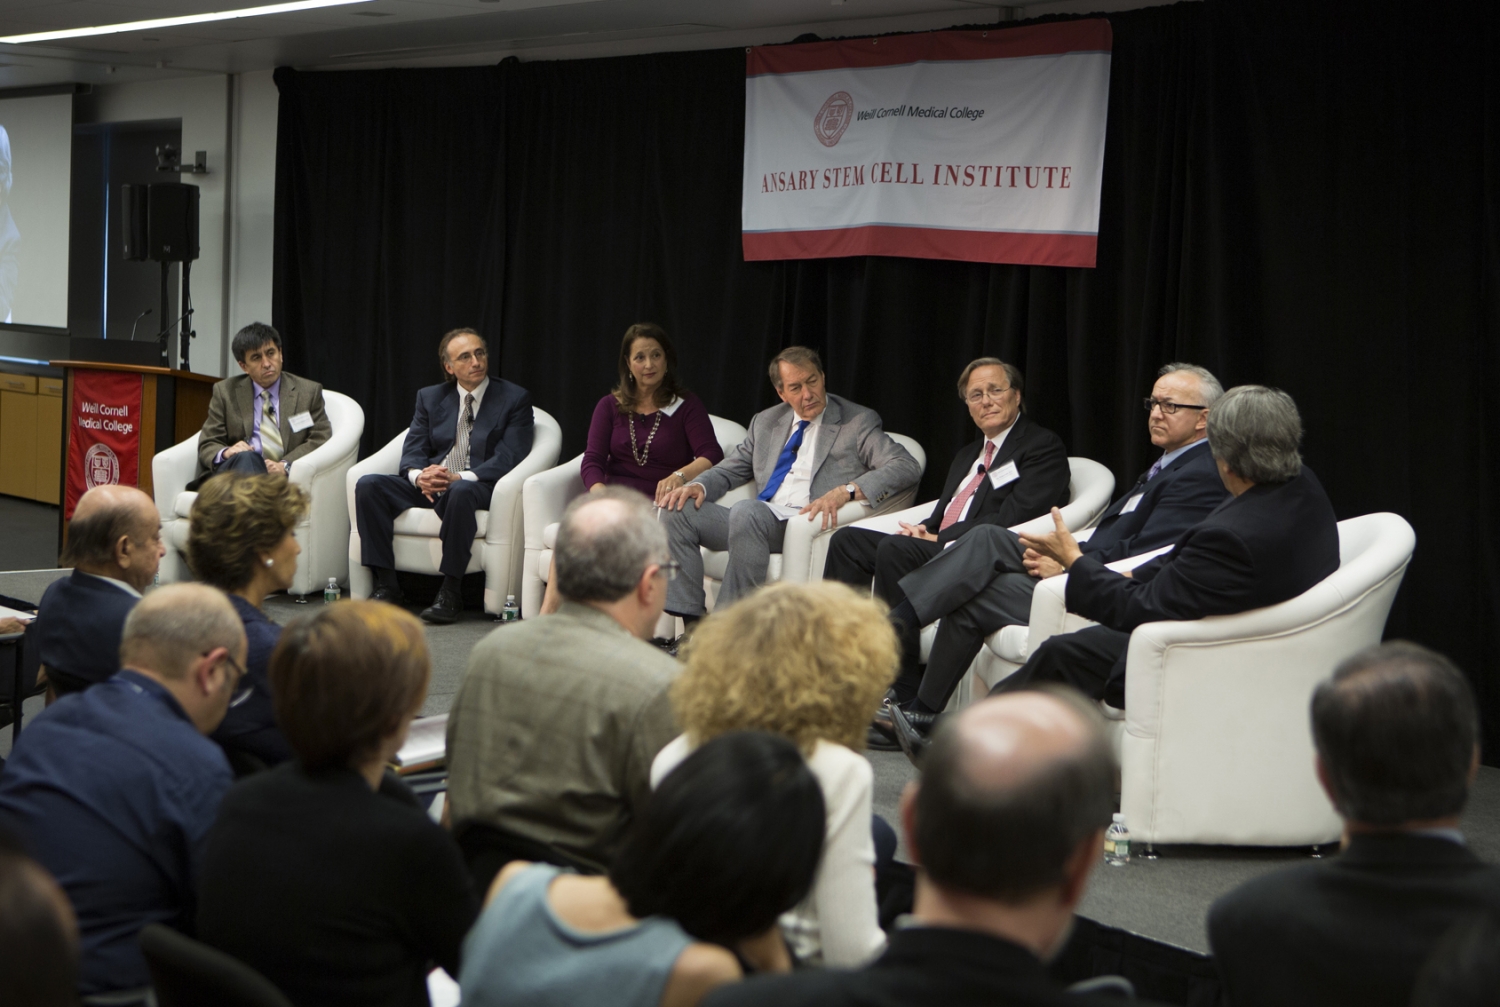 A roundtable hosted by broadcast journalist Charlie Rose was the marquee session of the Ansary Symposium on Stem Cell Research. From left, Dr. Shoukhrat Mitalipov, Dr. Shahin Rafii, Susan Solomon, Rose, Dr. Zev Rosenwaks, Dr. George Daley and Dr. Alan Trounson.  All photos: Janet Charles